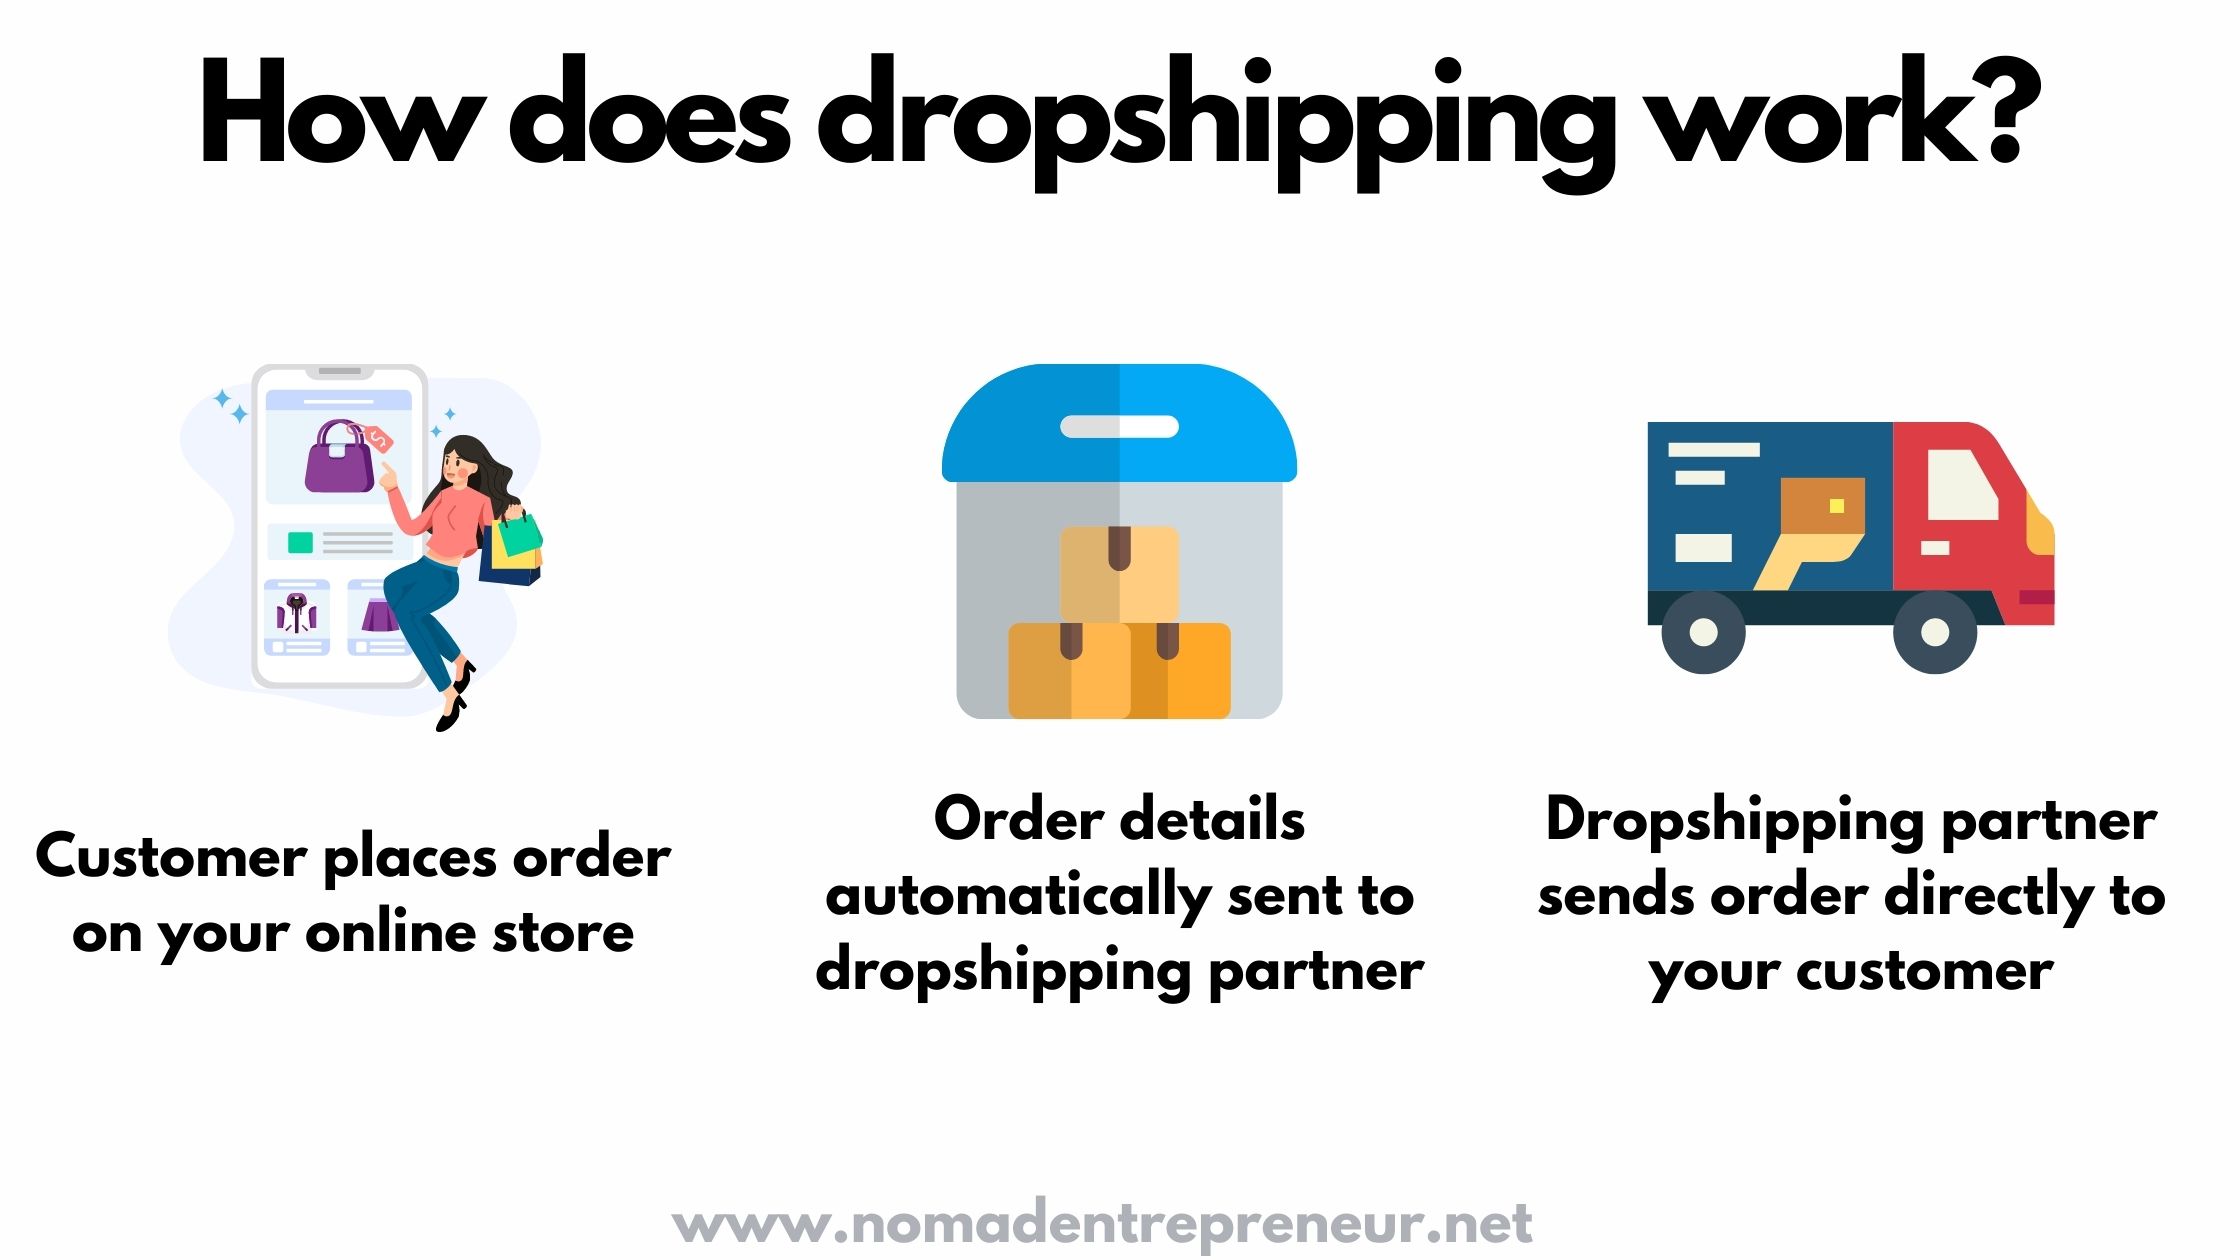 How does dropshipping work - Nomad Entrepreneur